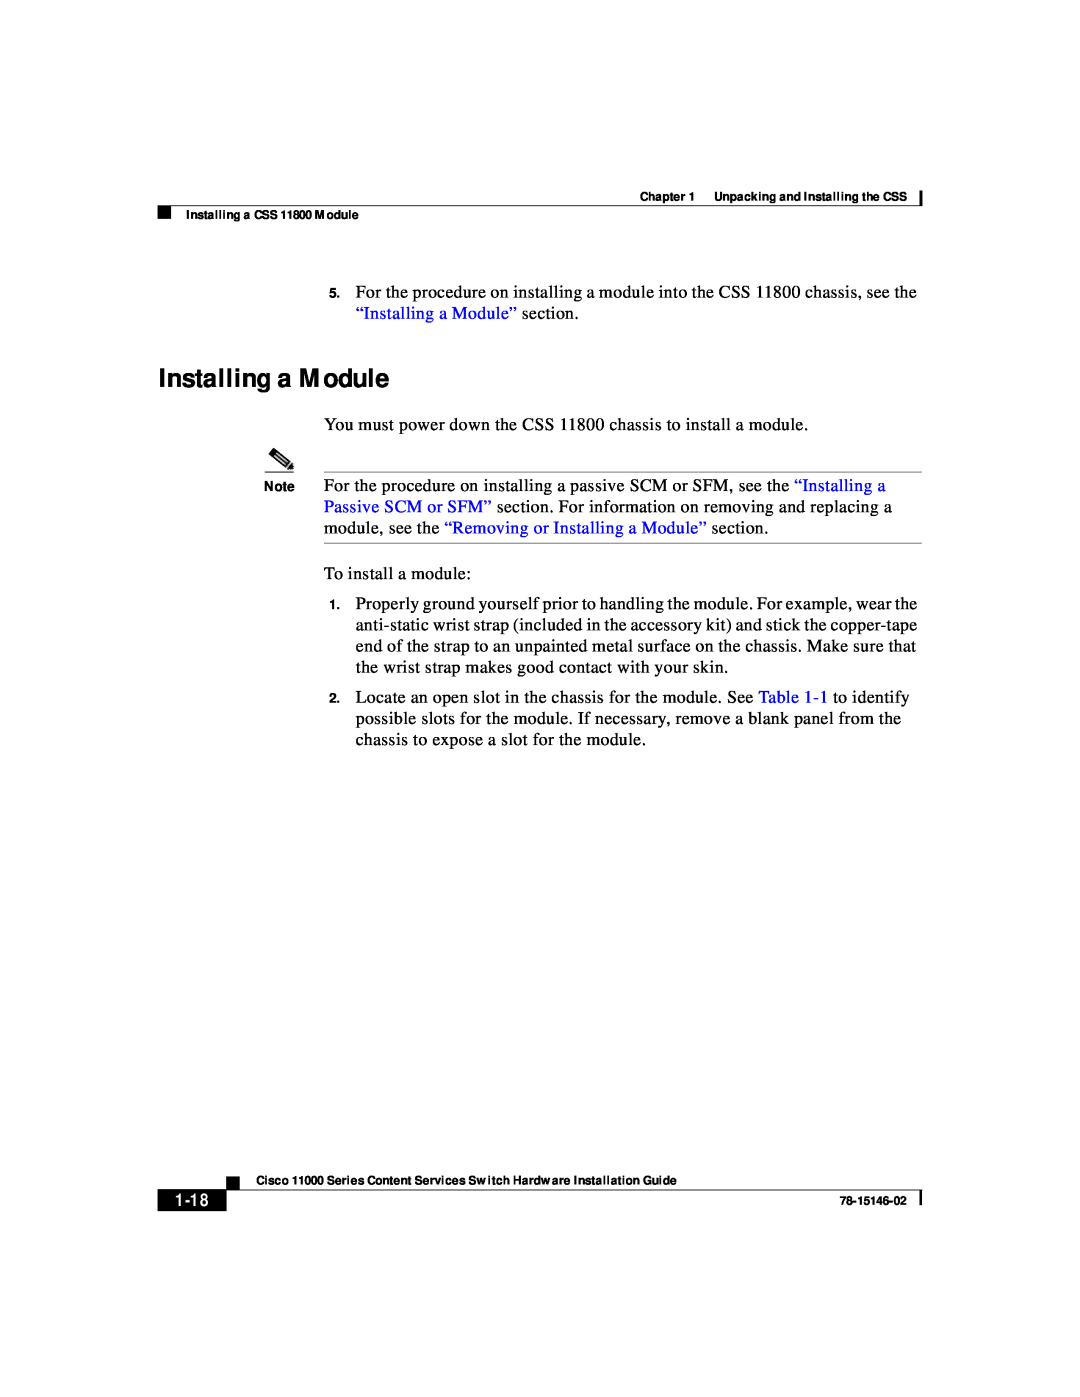 Cisco Systems 11000 Series manual Installing a Module, 1-18 